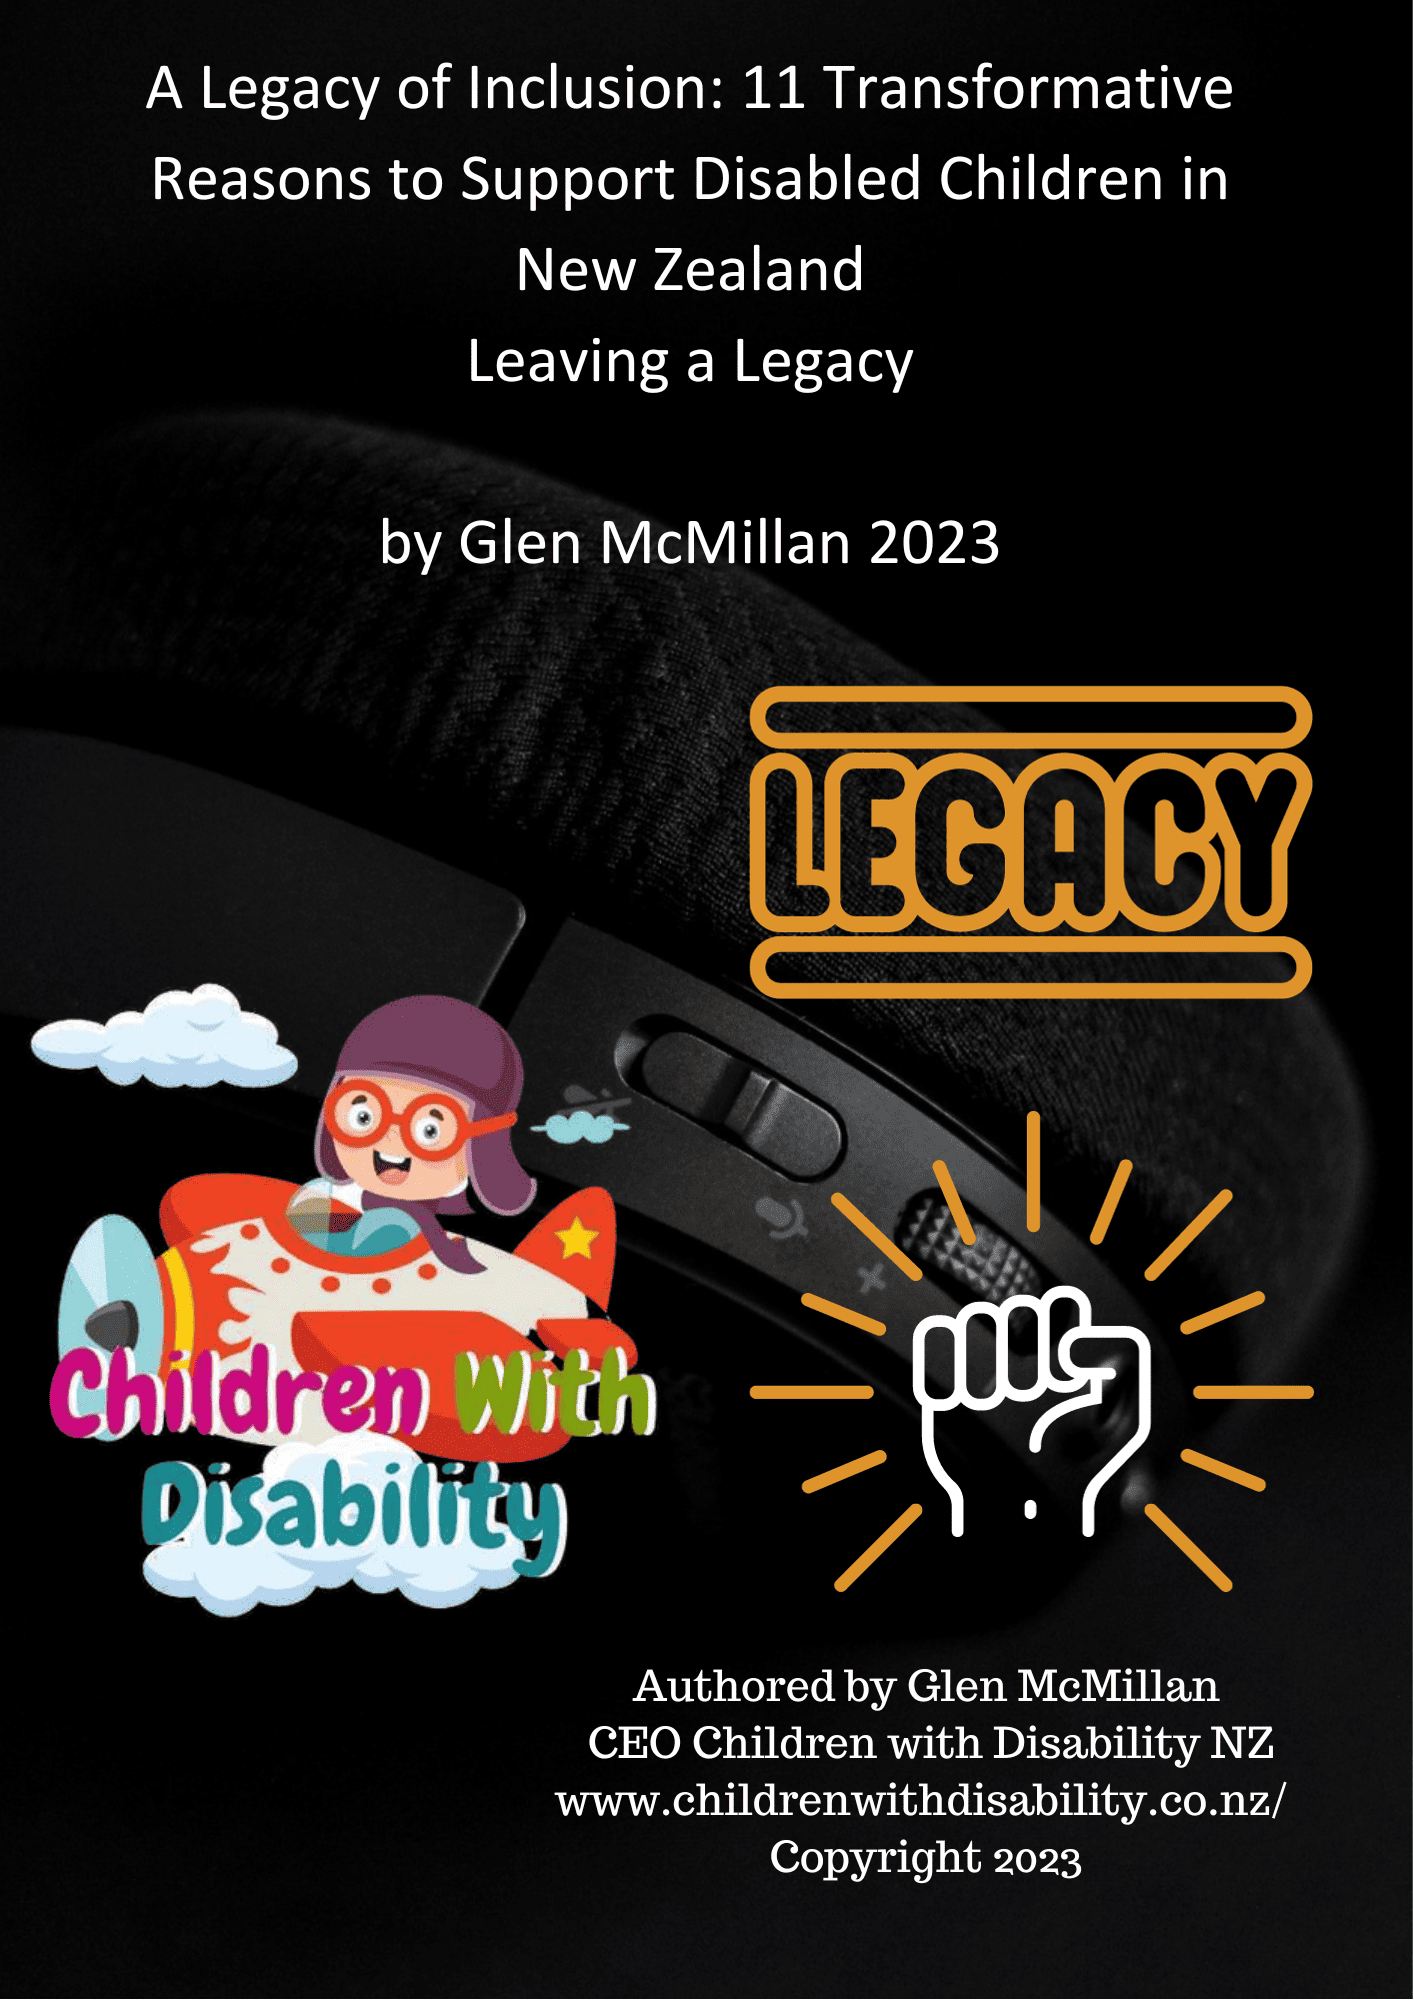 A Legacy of Inclusion 11 Transformative Reasons to Support Disabled Children in New Zealand